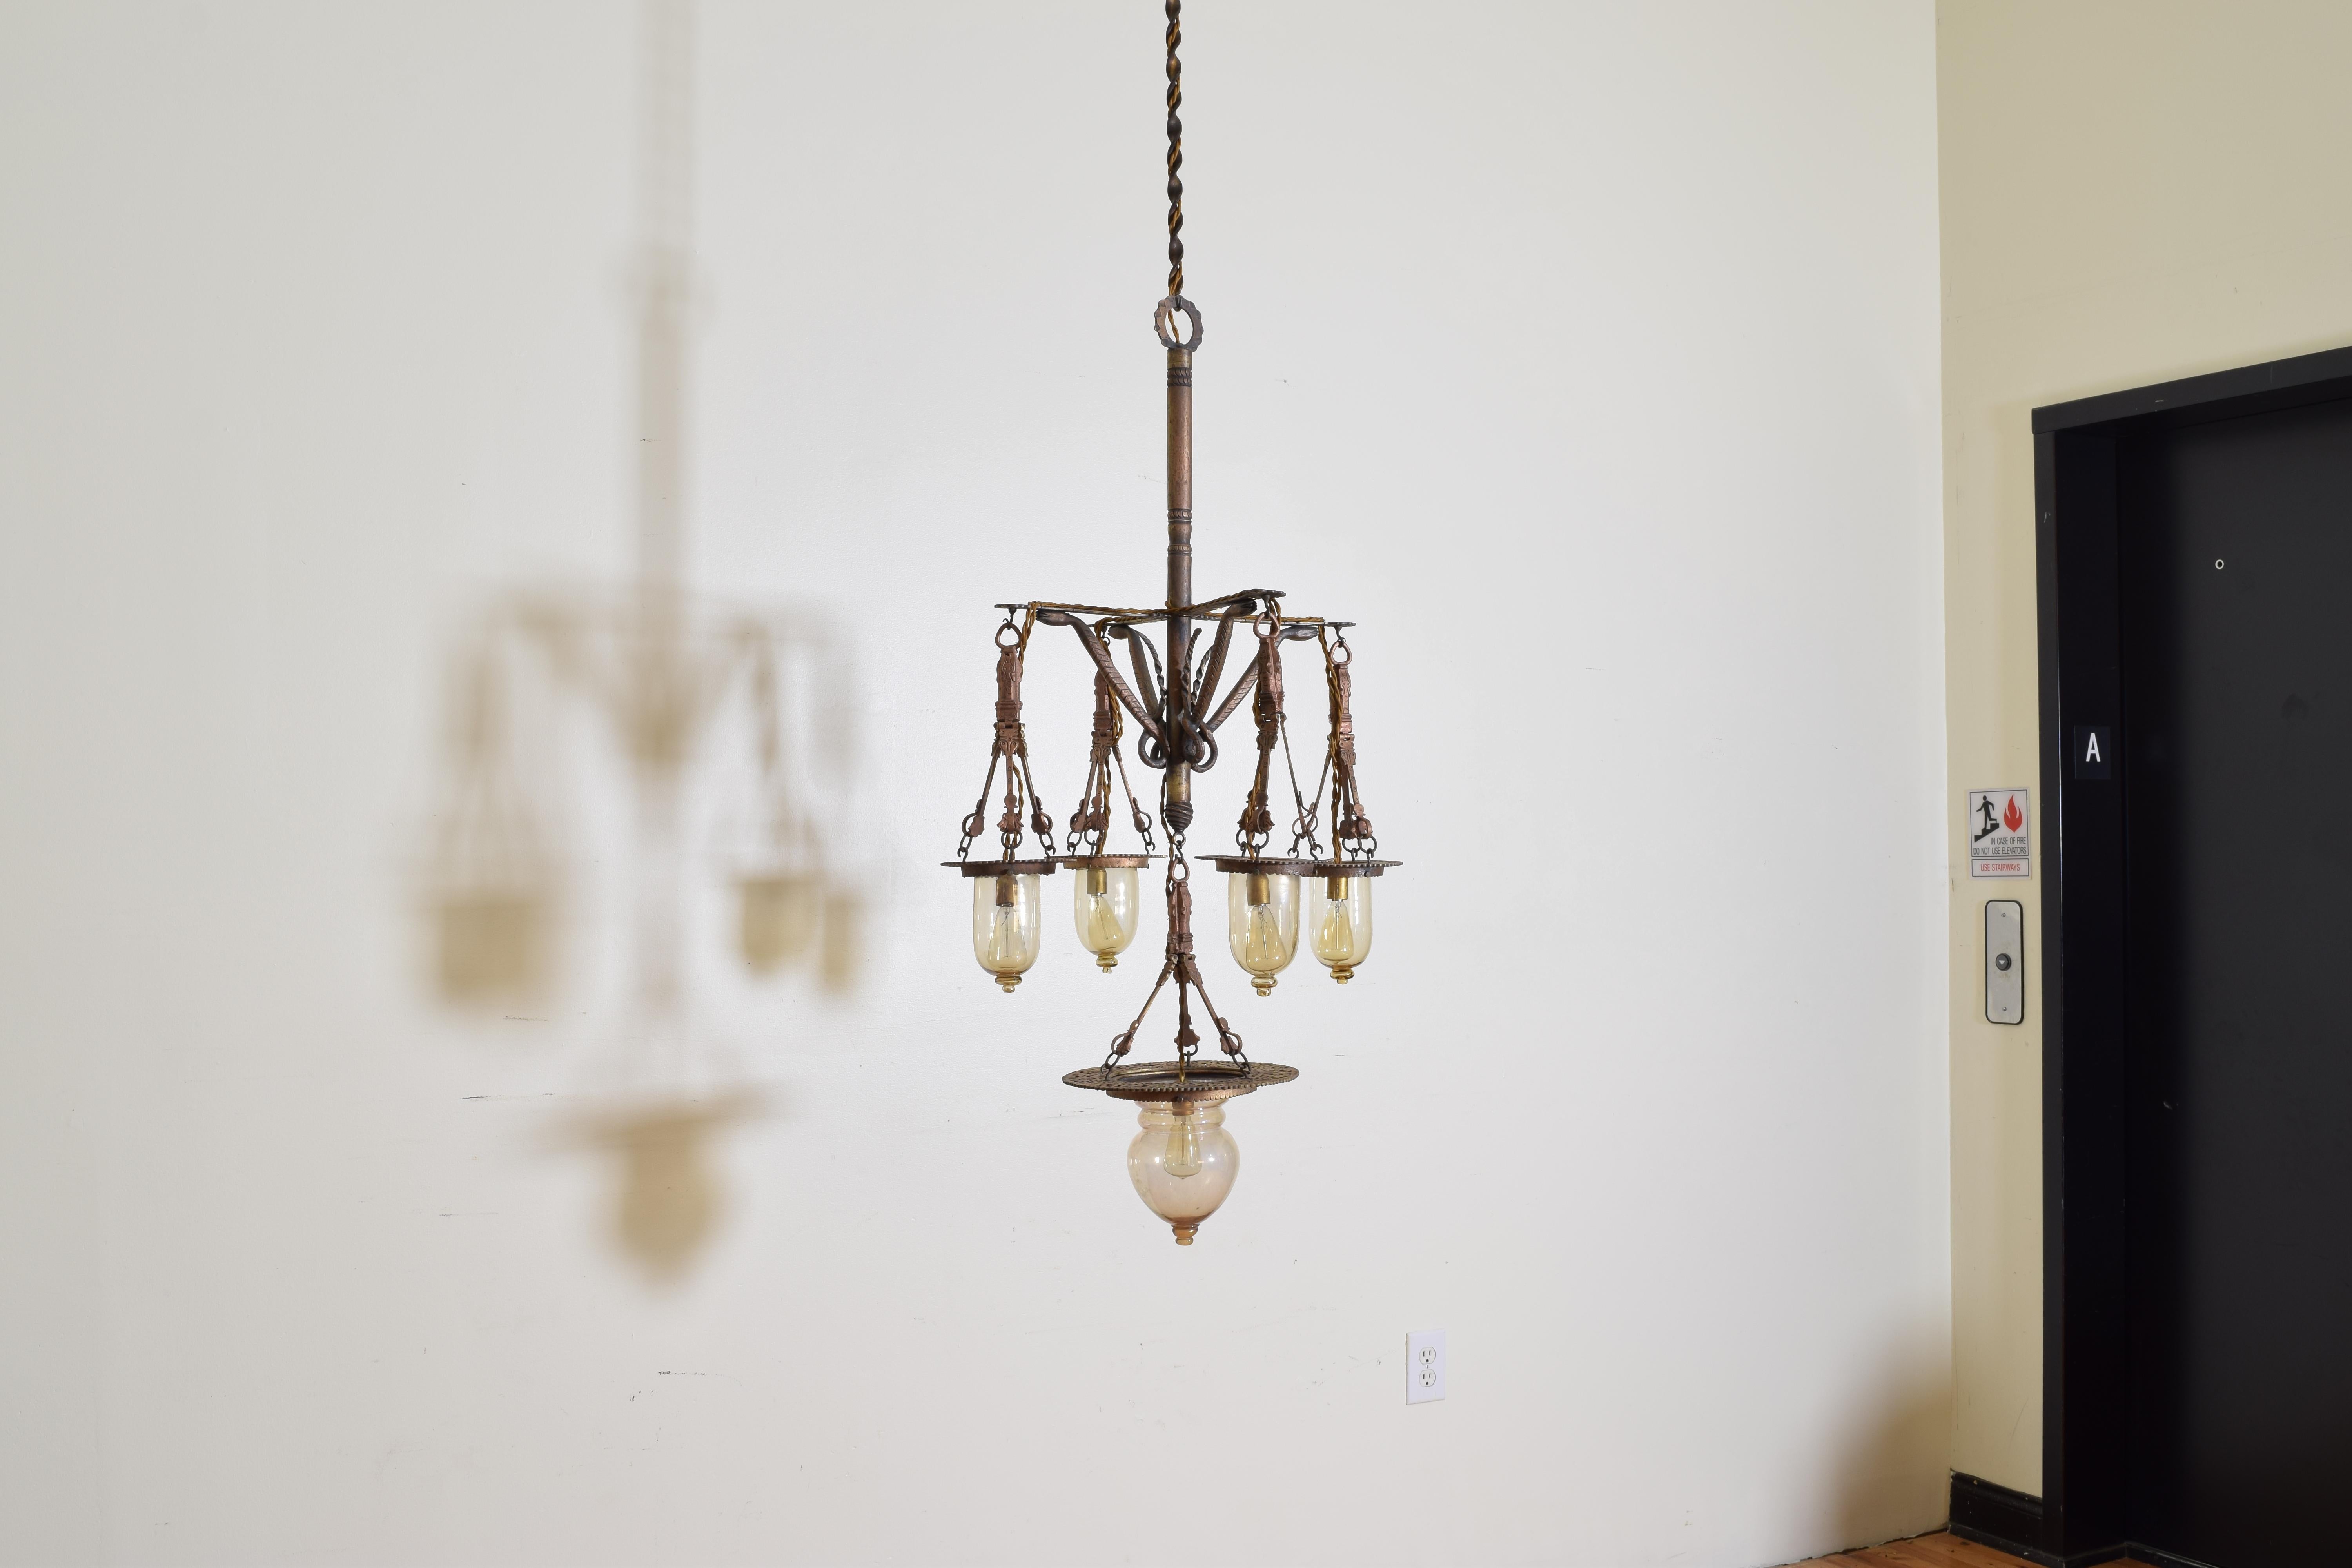 Originally an oil lantern and probably from Venice, Italy, with 4 arms connected to the central standard by horizontal brackets and diagonal decorative serpents, each end with a hanging glass globe, the bottom of the chandelier issuing one larger